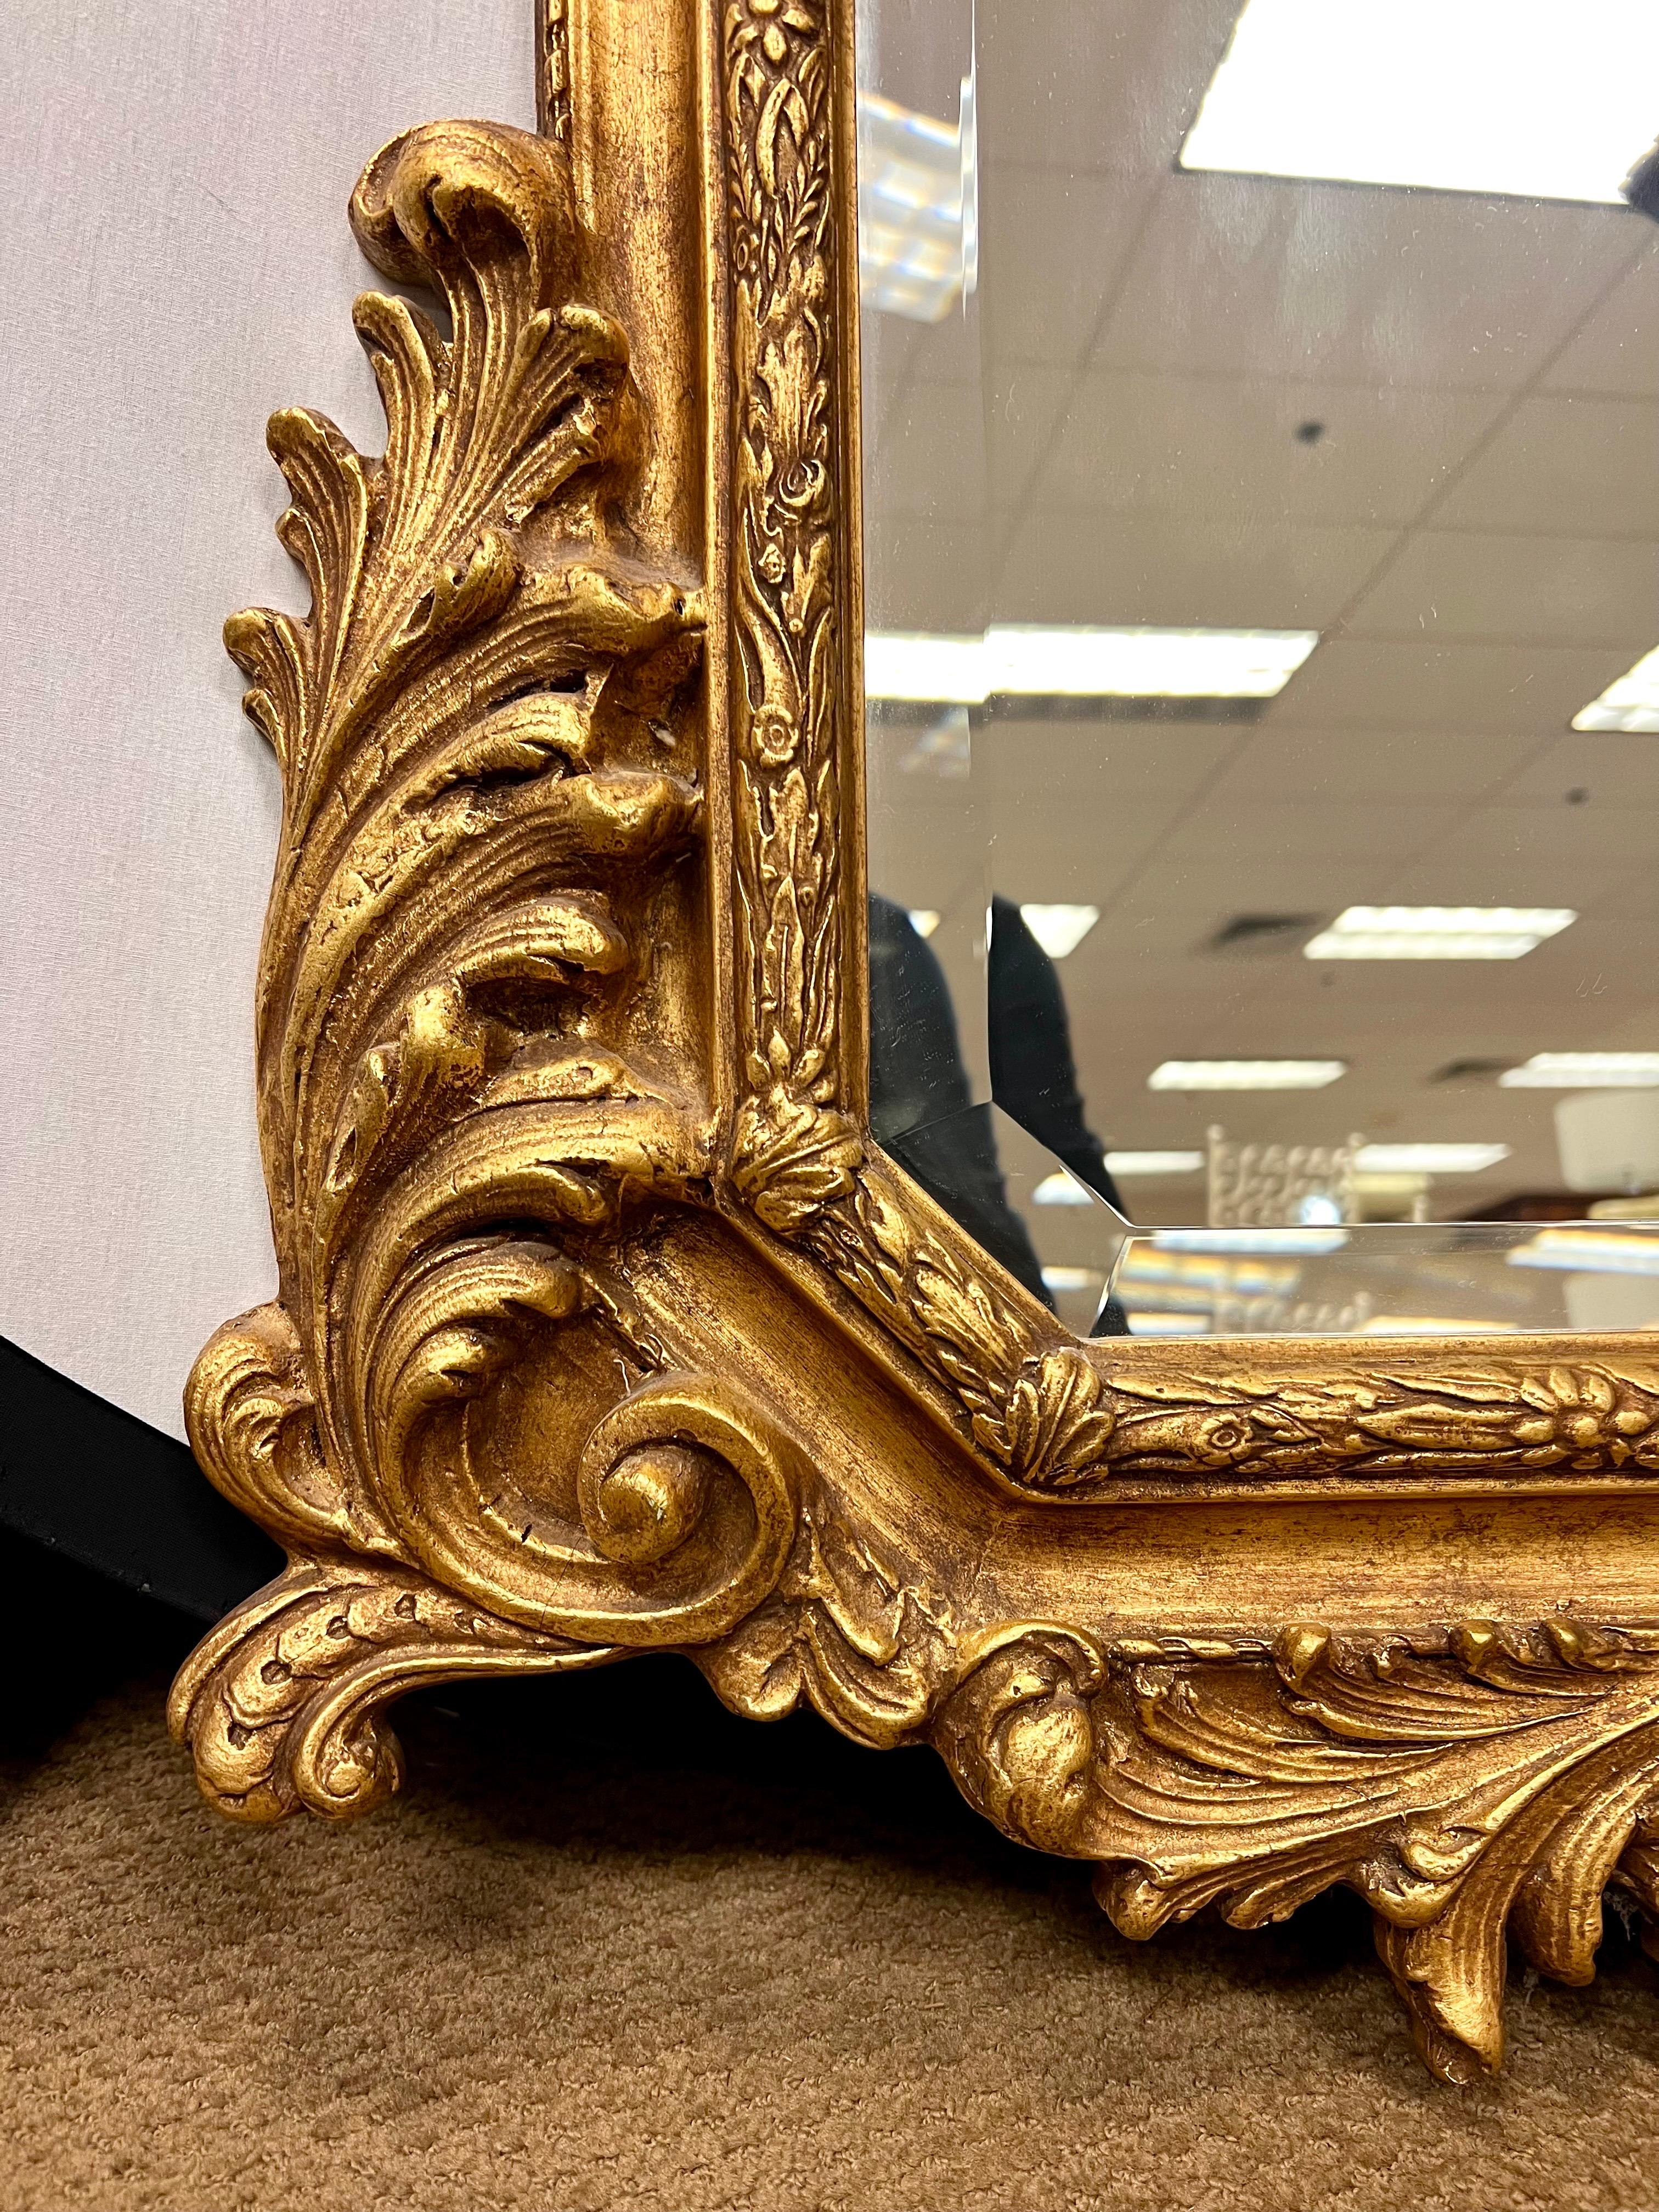 Large Rococco Ornate Carved Gold Giltwood Mantle Mirror In Excellent Condition For Sale In West Hartford, CT